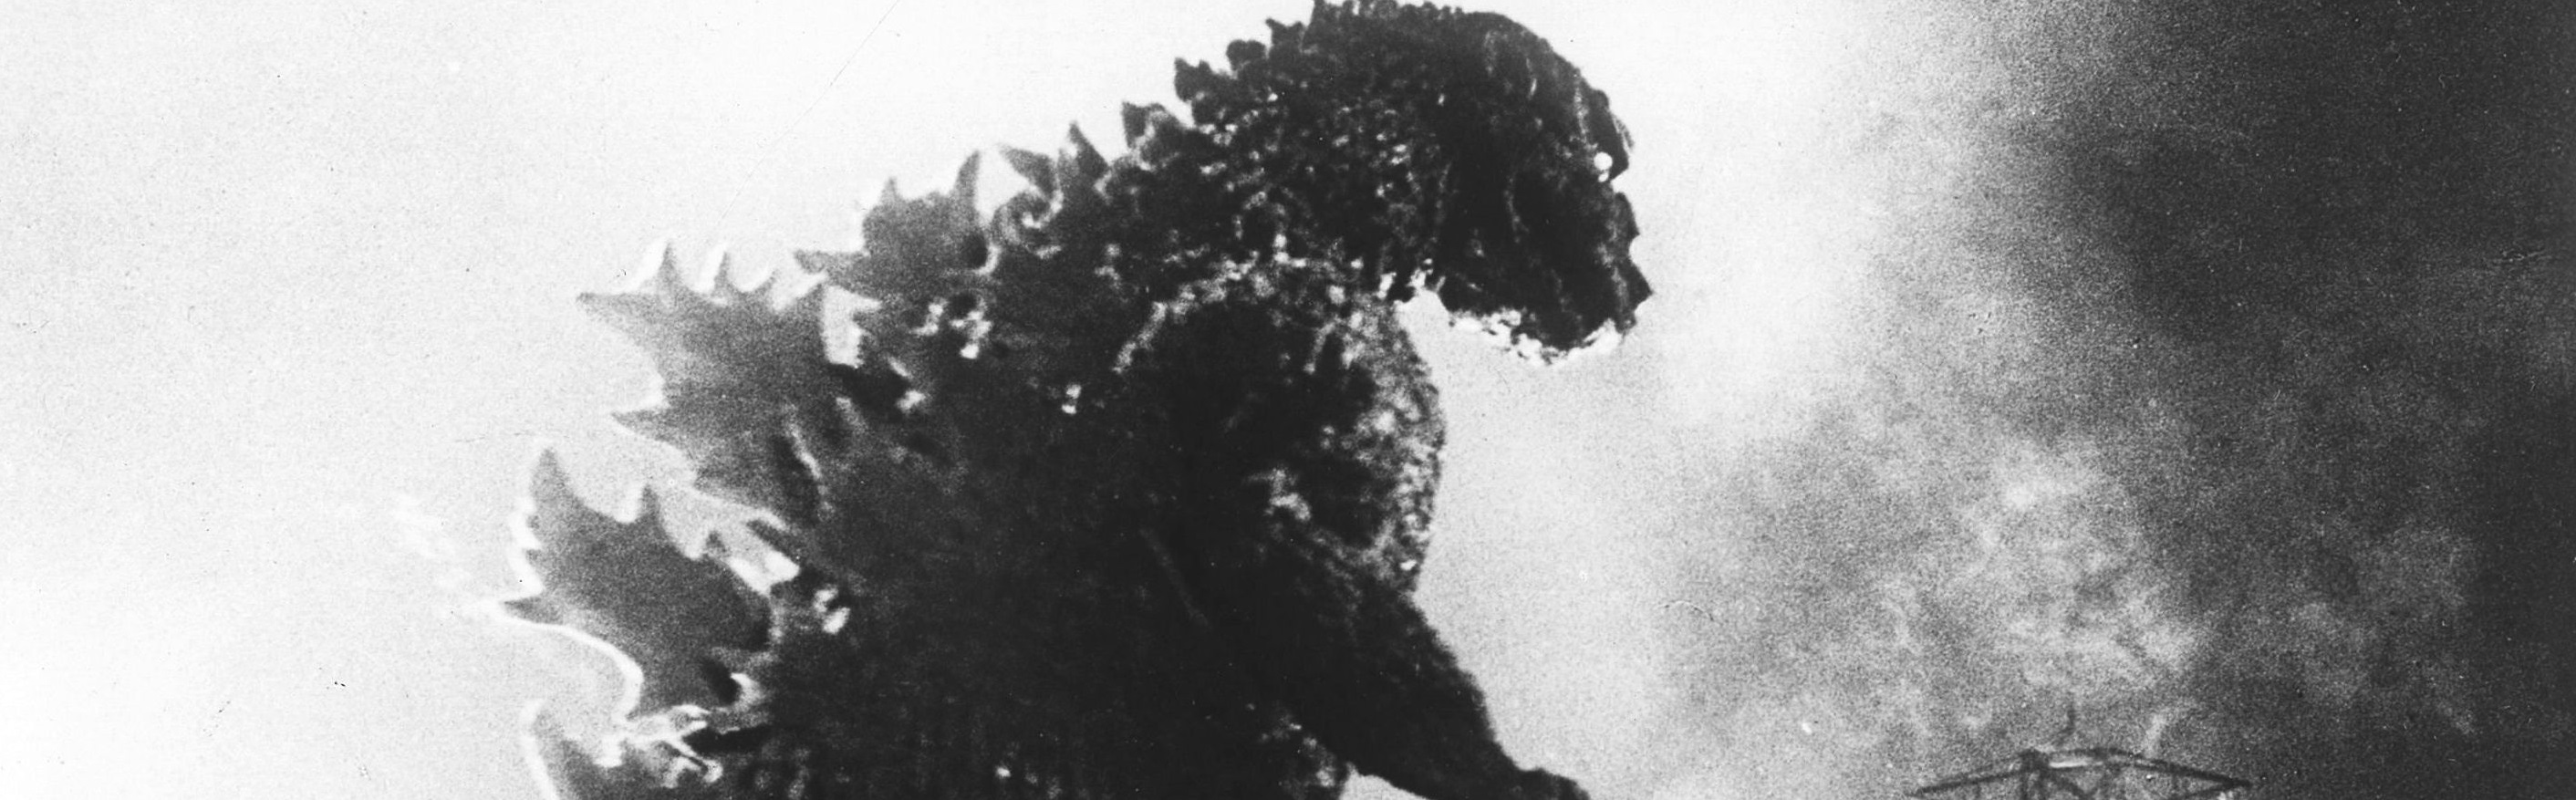 Geek insider, geekinsider, geekinsider. Com,, the king of monsters: a look into godzilla’s dark past, entertainment